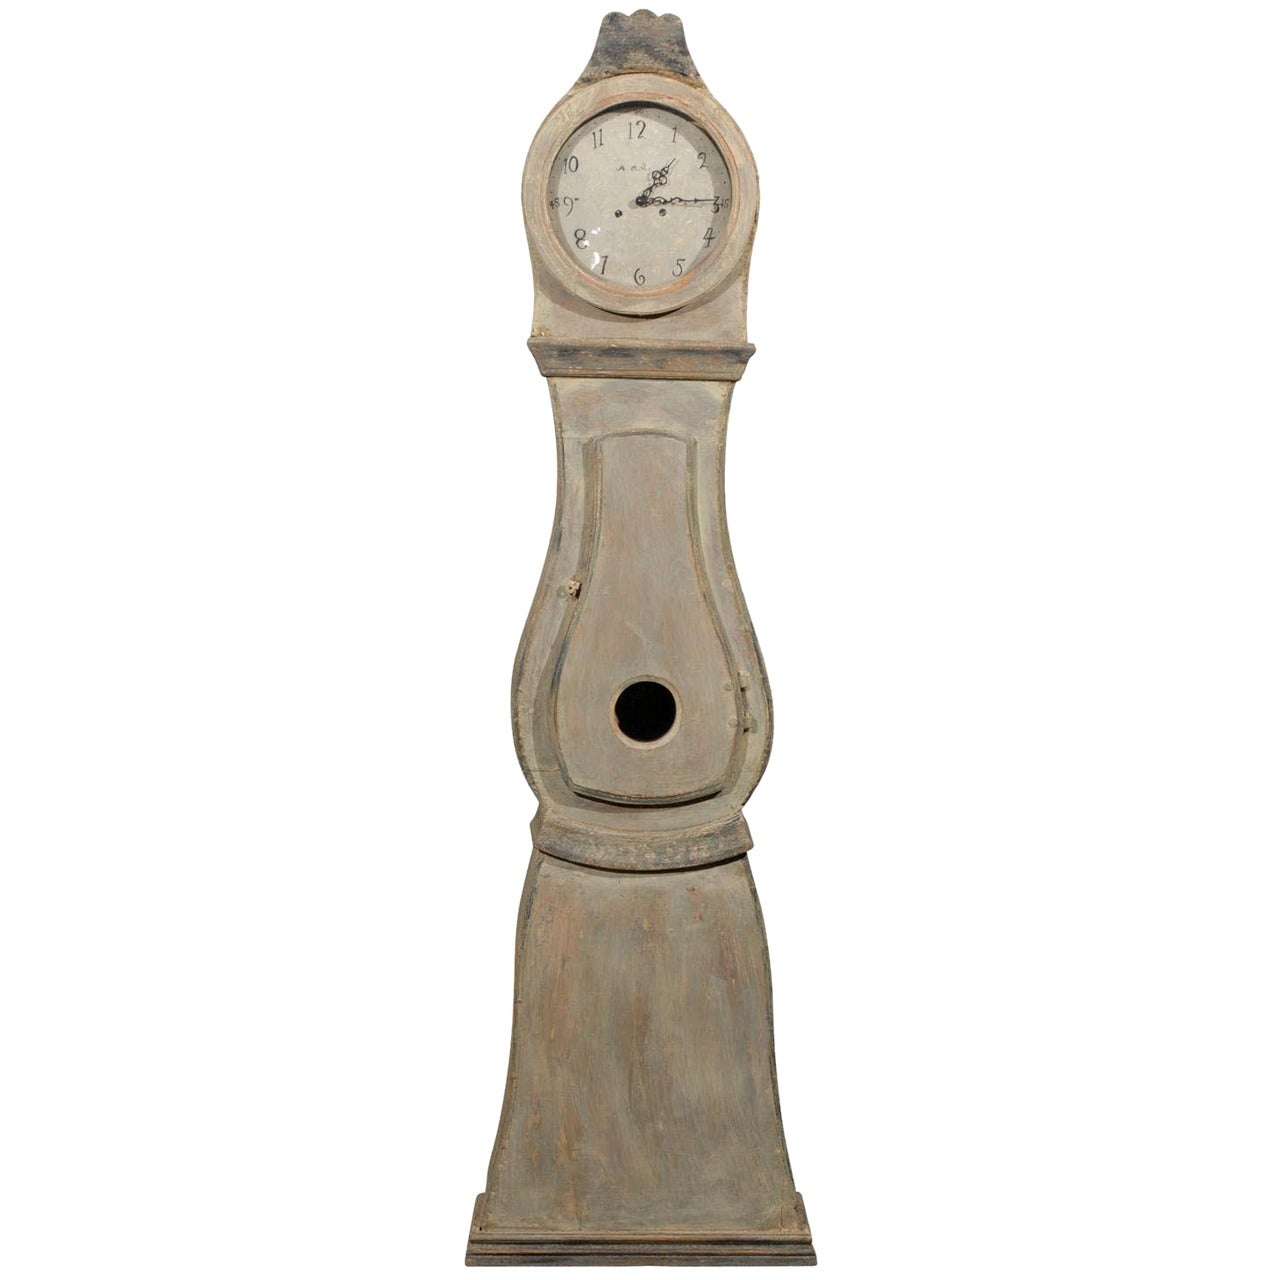 A 19th Century Swedish Clock, commonly known as a Mora Clock